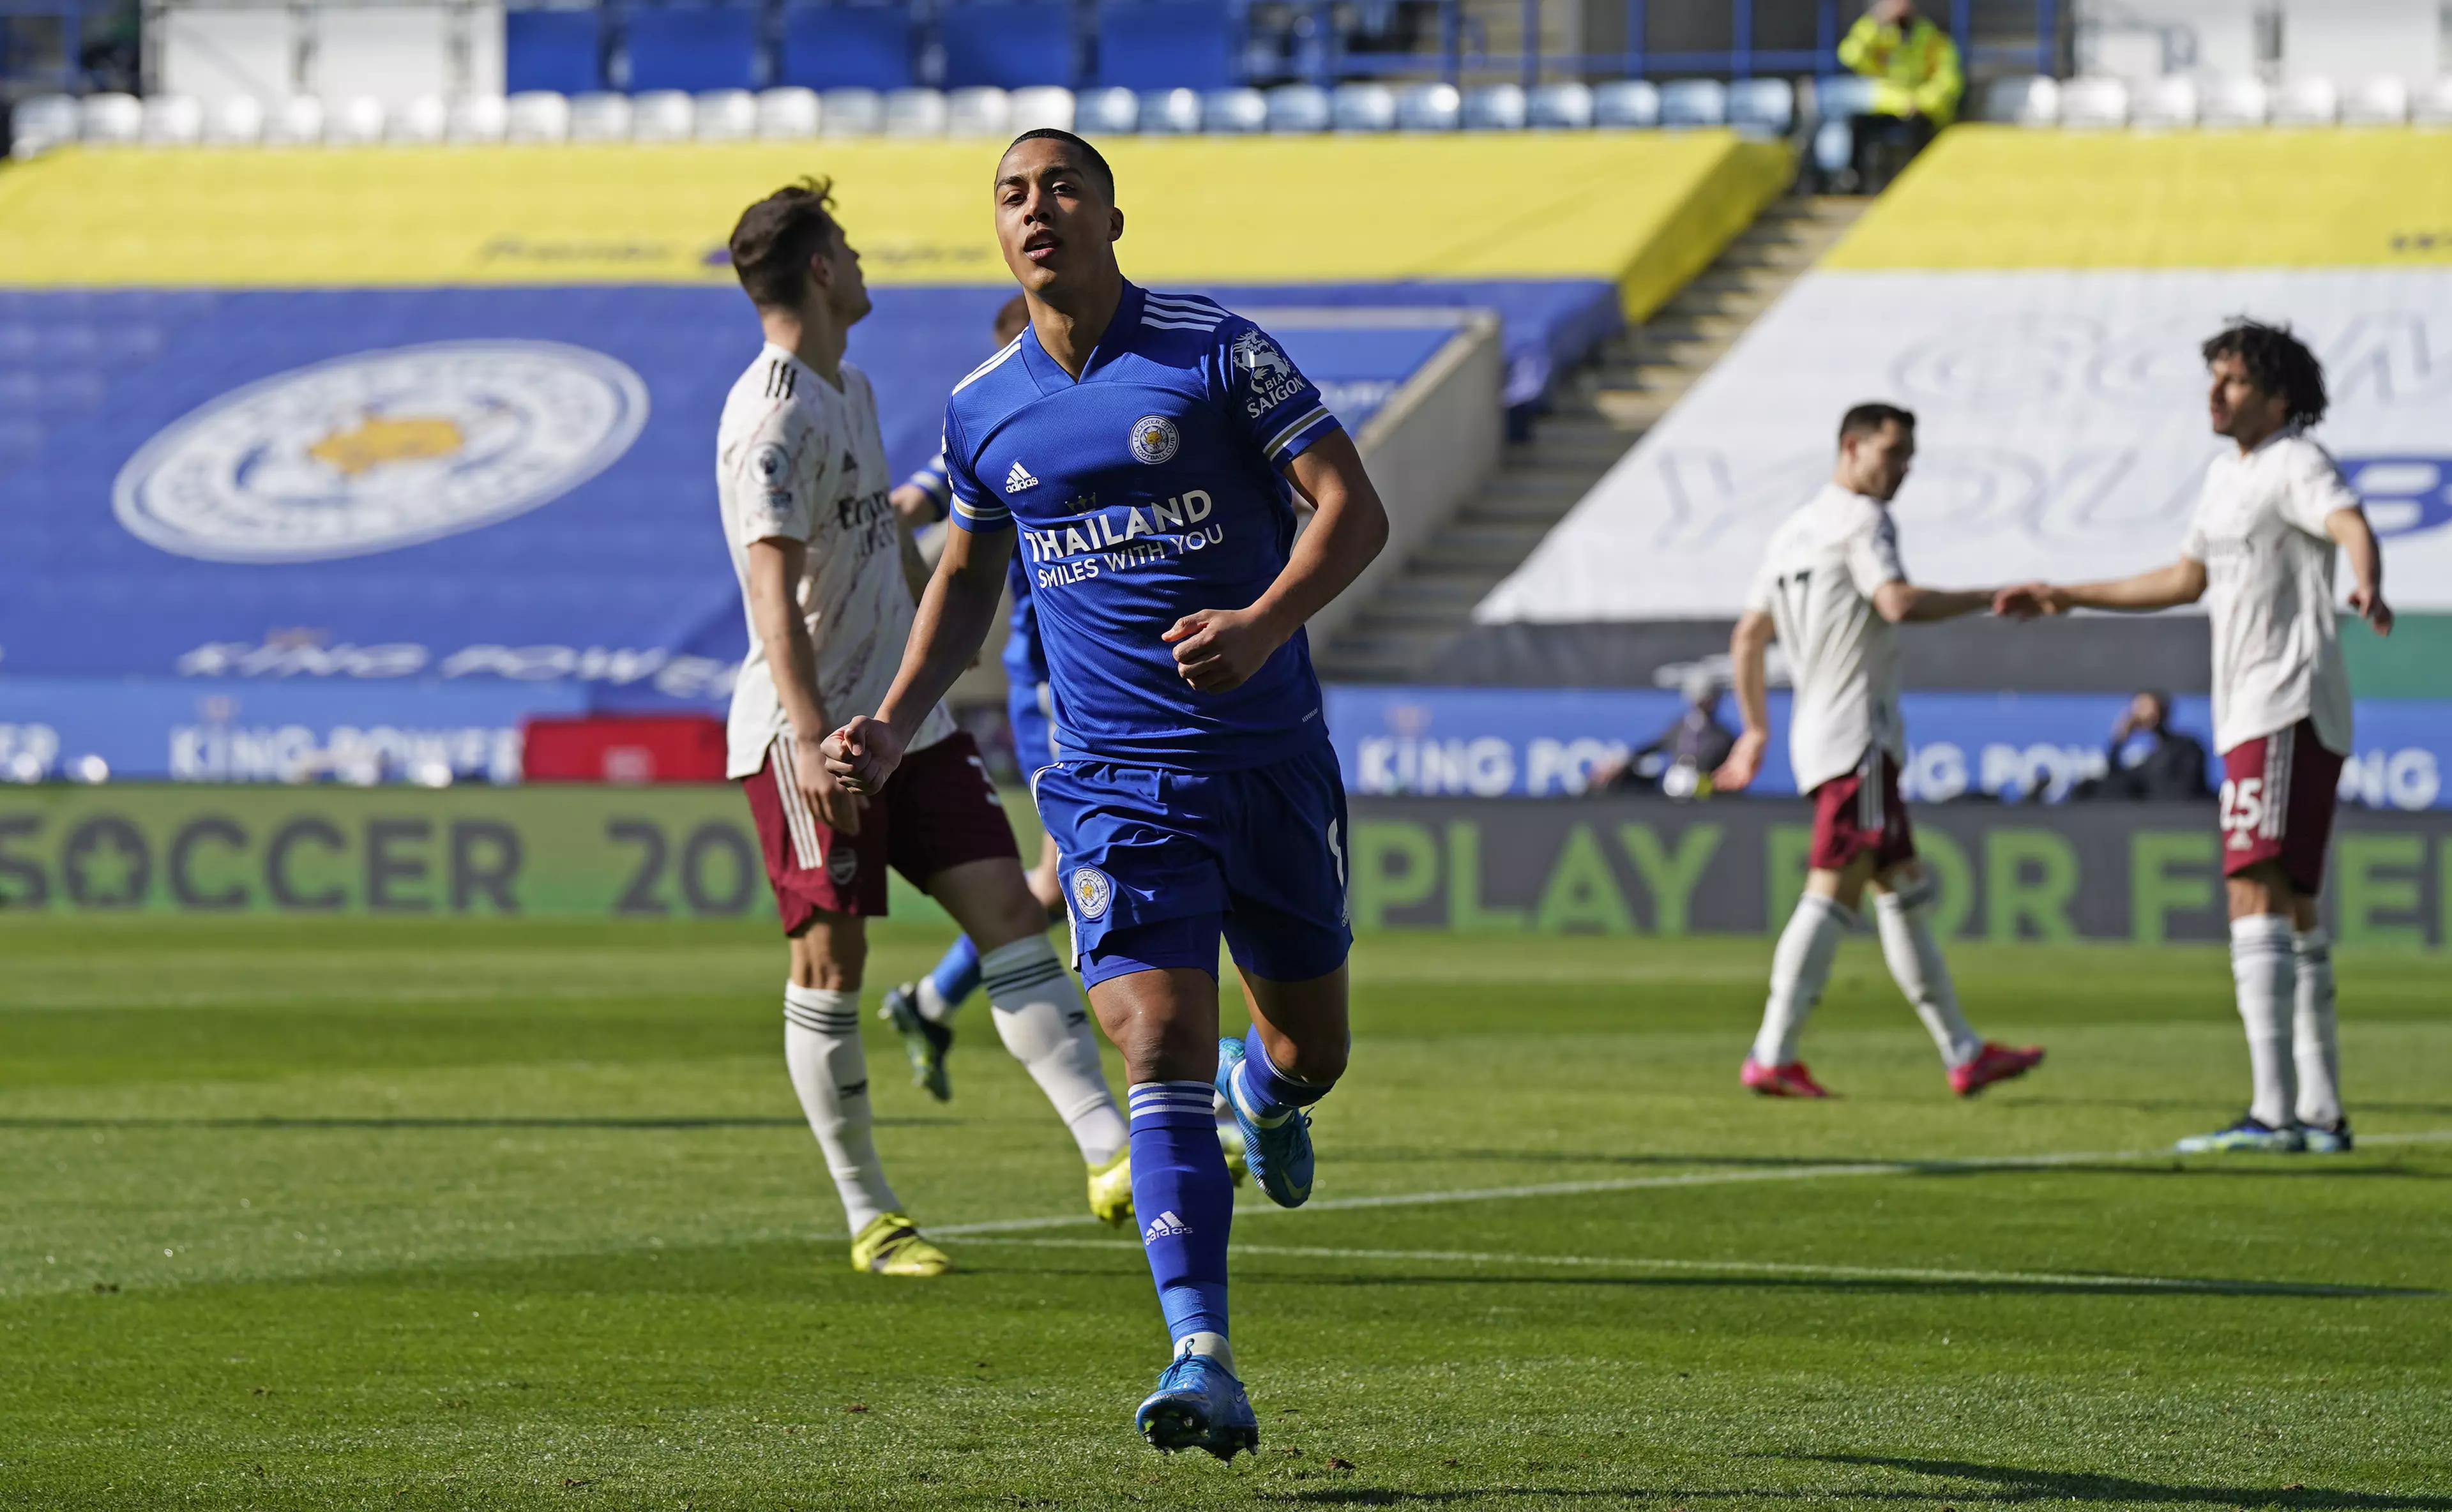 Tielemans has become an integral part of Leicester's impressive team. Image: PA Images